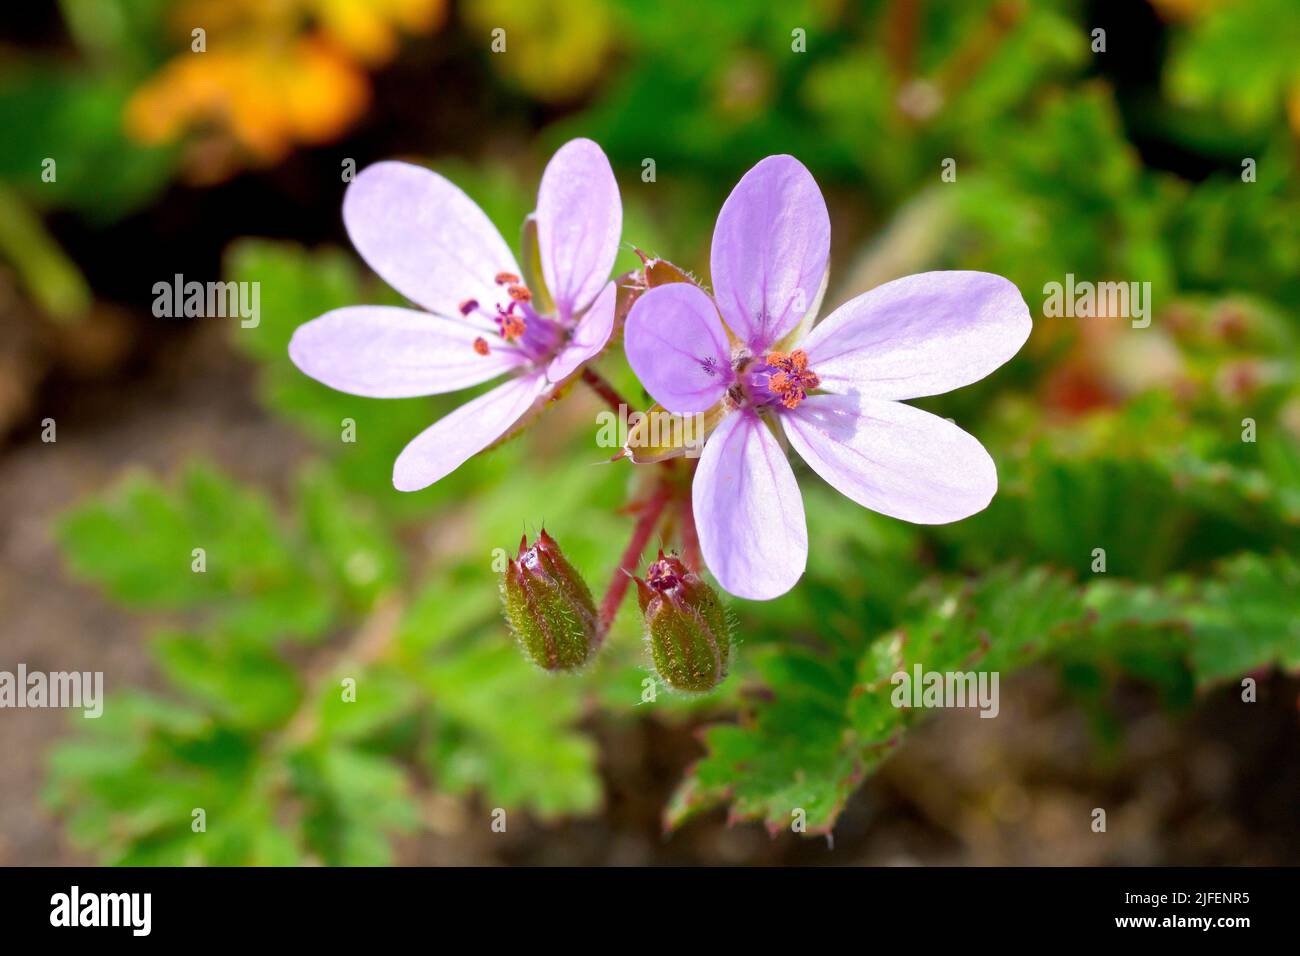 Common Stork's-bill (erodium cicutarium), close up of a pair of pink flowers growing out over rough ground. Stock Photo